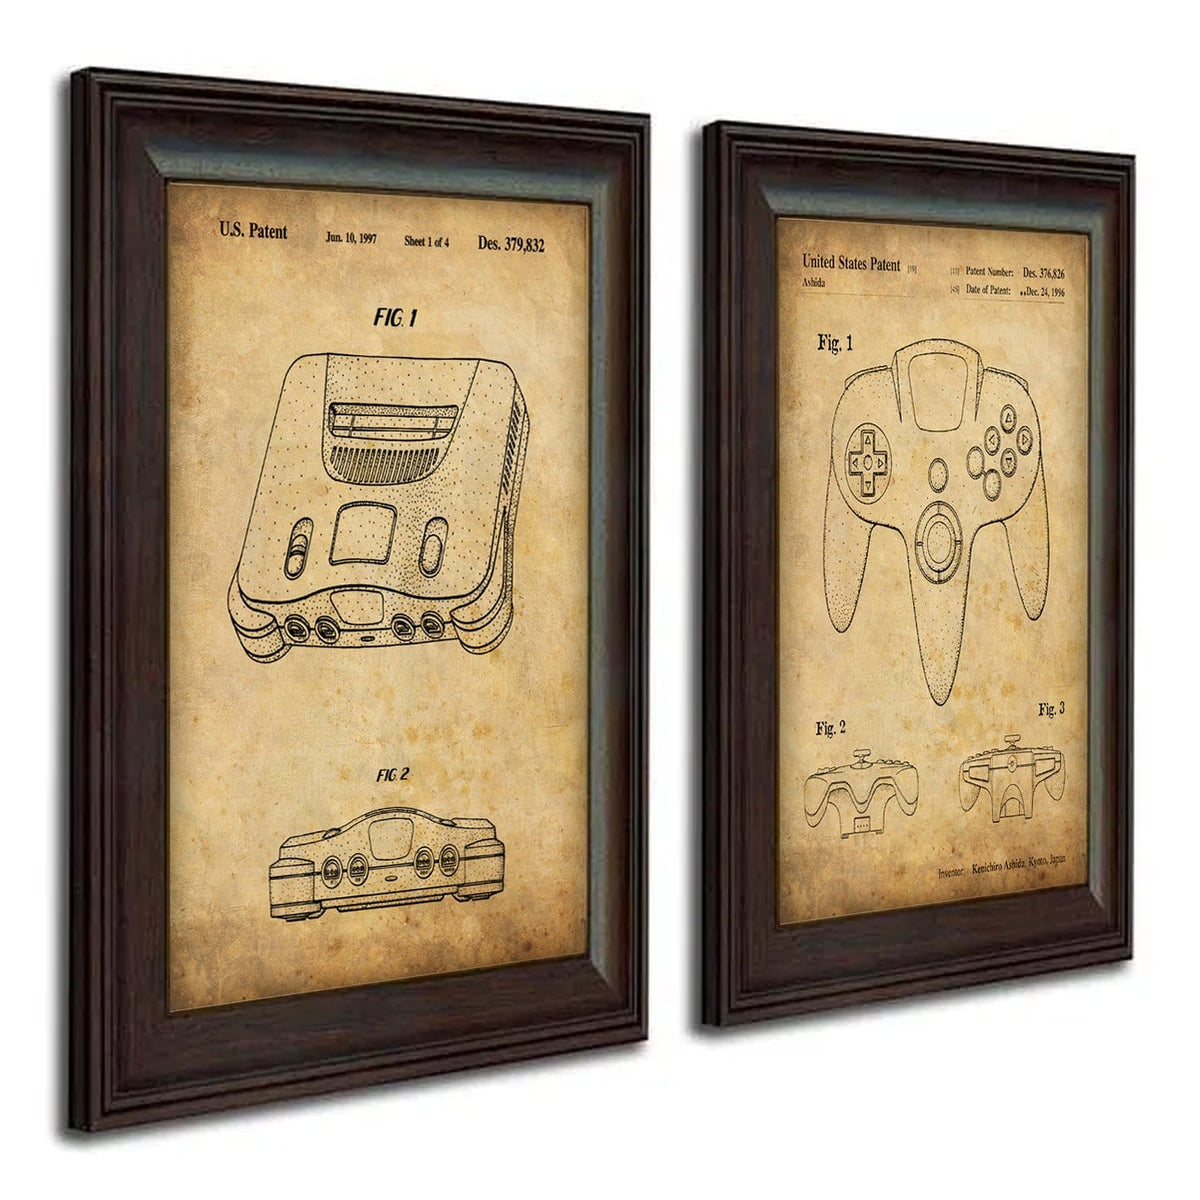 Set of 2 US Patent drawings of retro video game console and controller